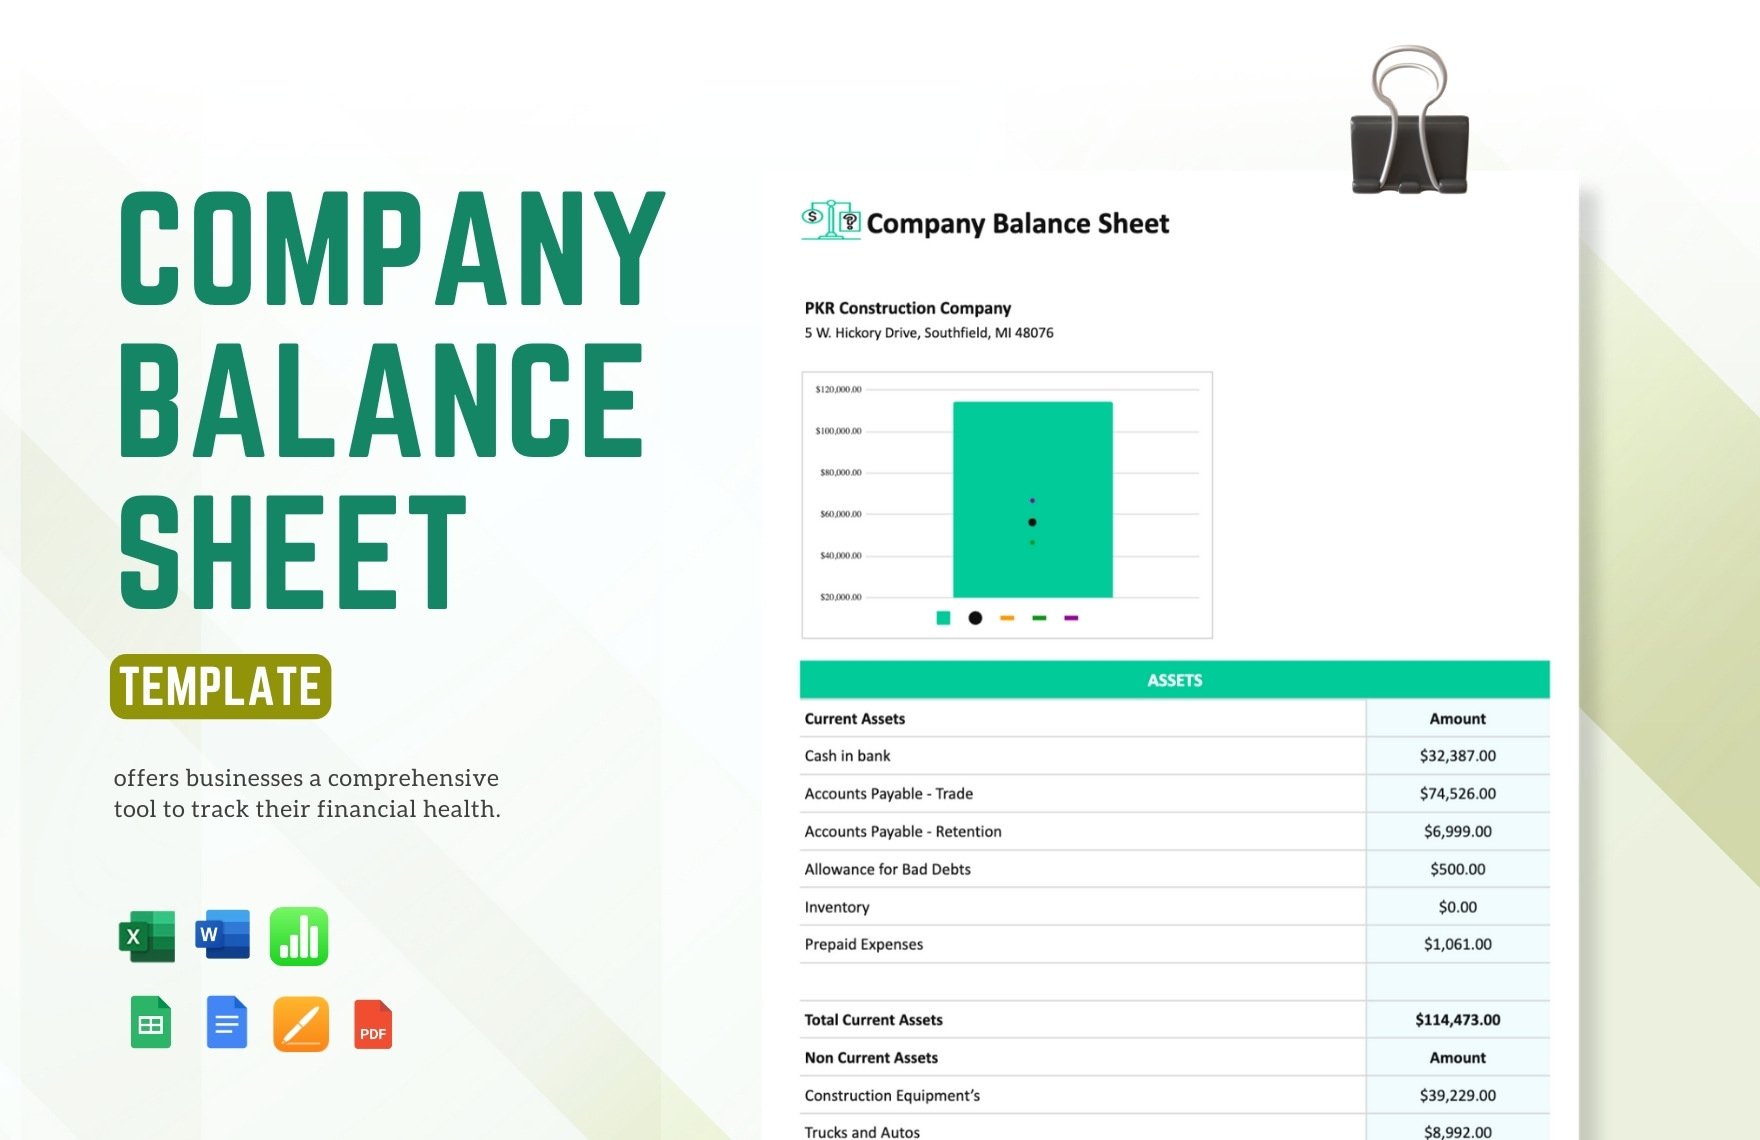 Company Balance Sheet Template in Word, Google Docs, Excel, PDF, Google Sheets, Apple Pages, Apple Numbers